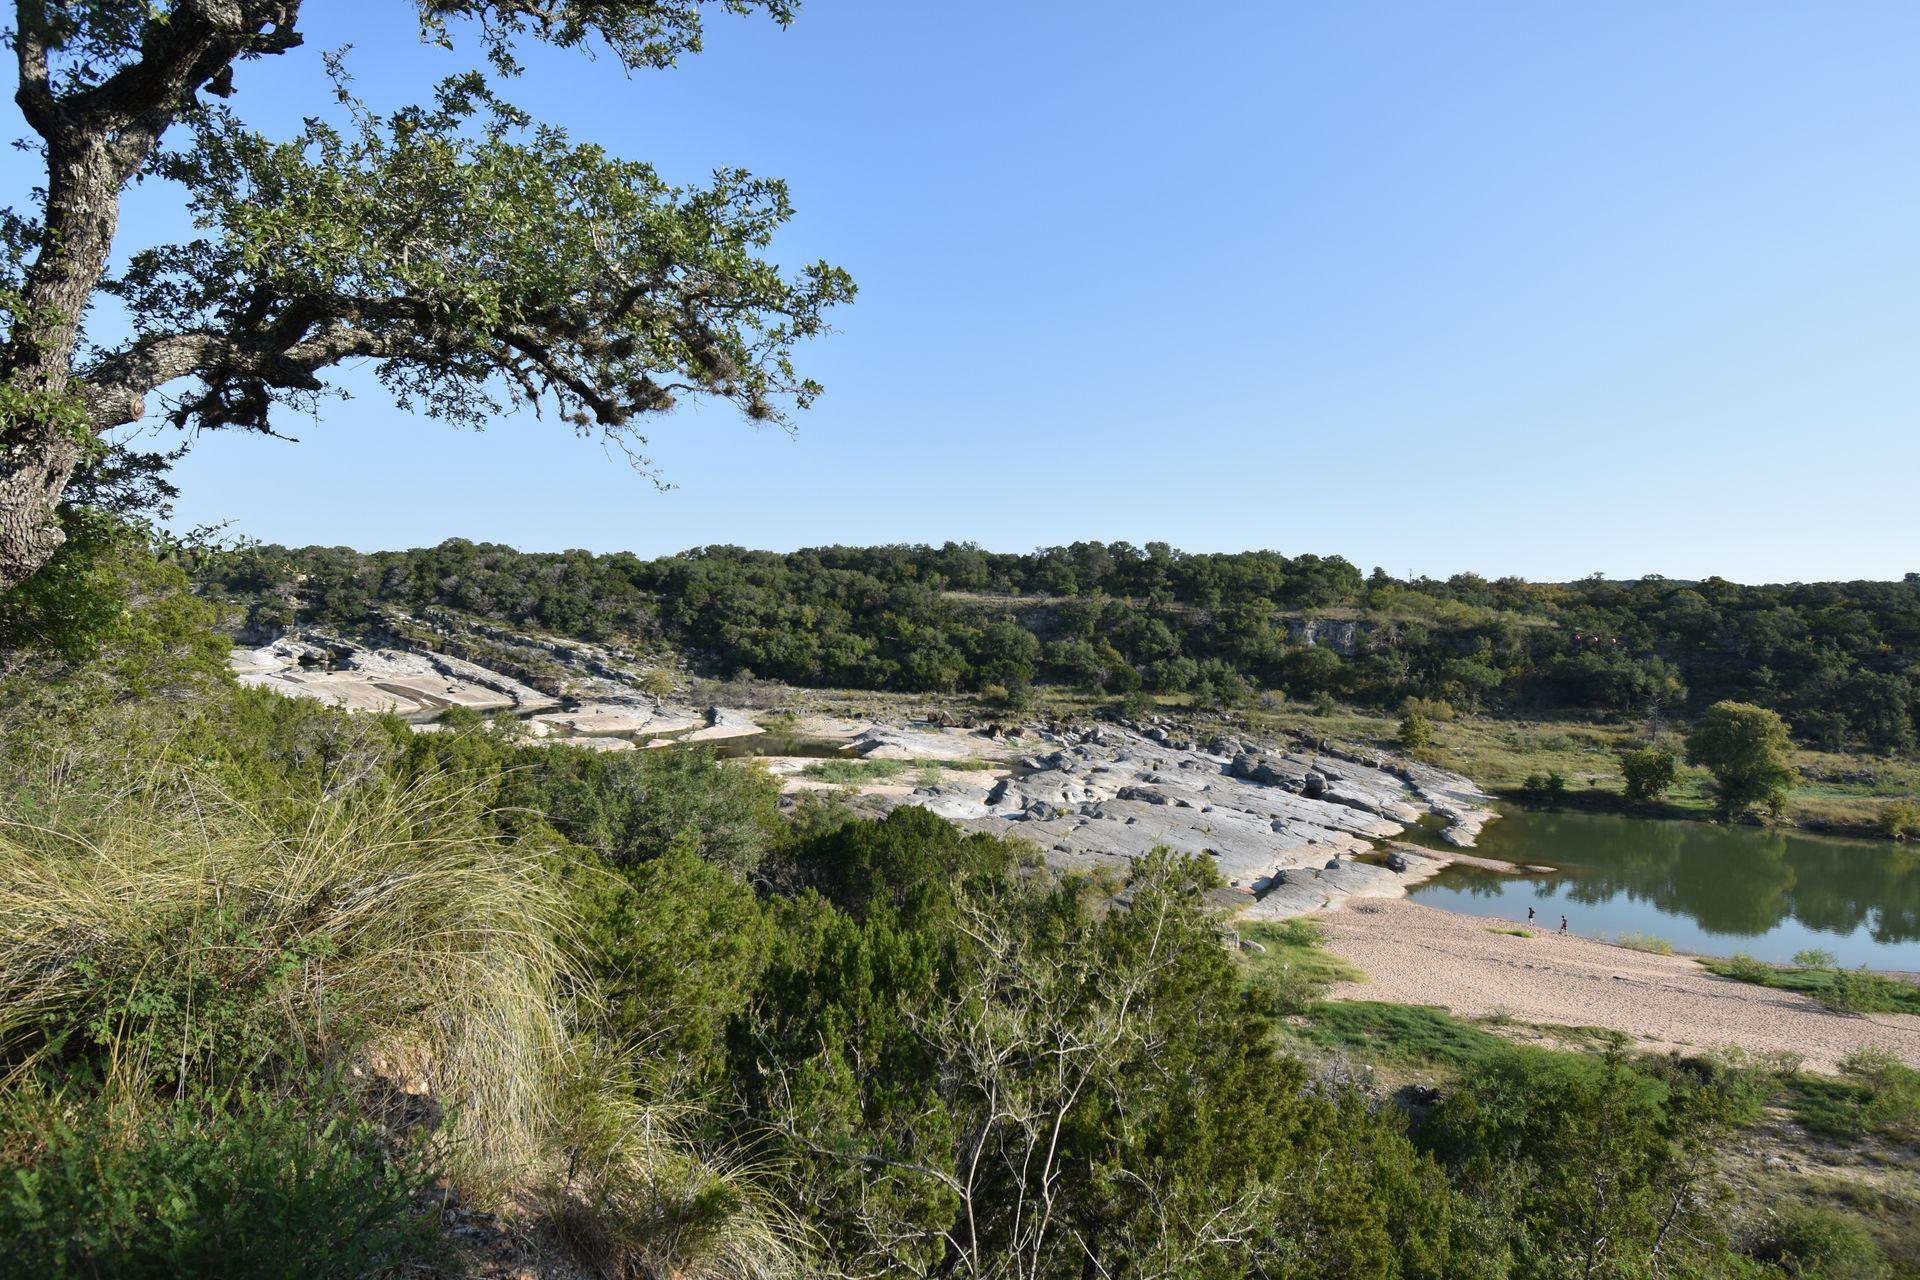 A view of the Pedernales Falls area from an overlook.